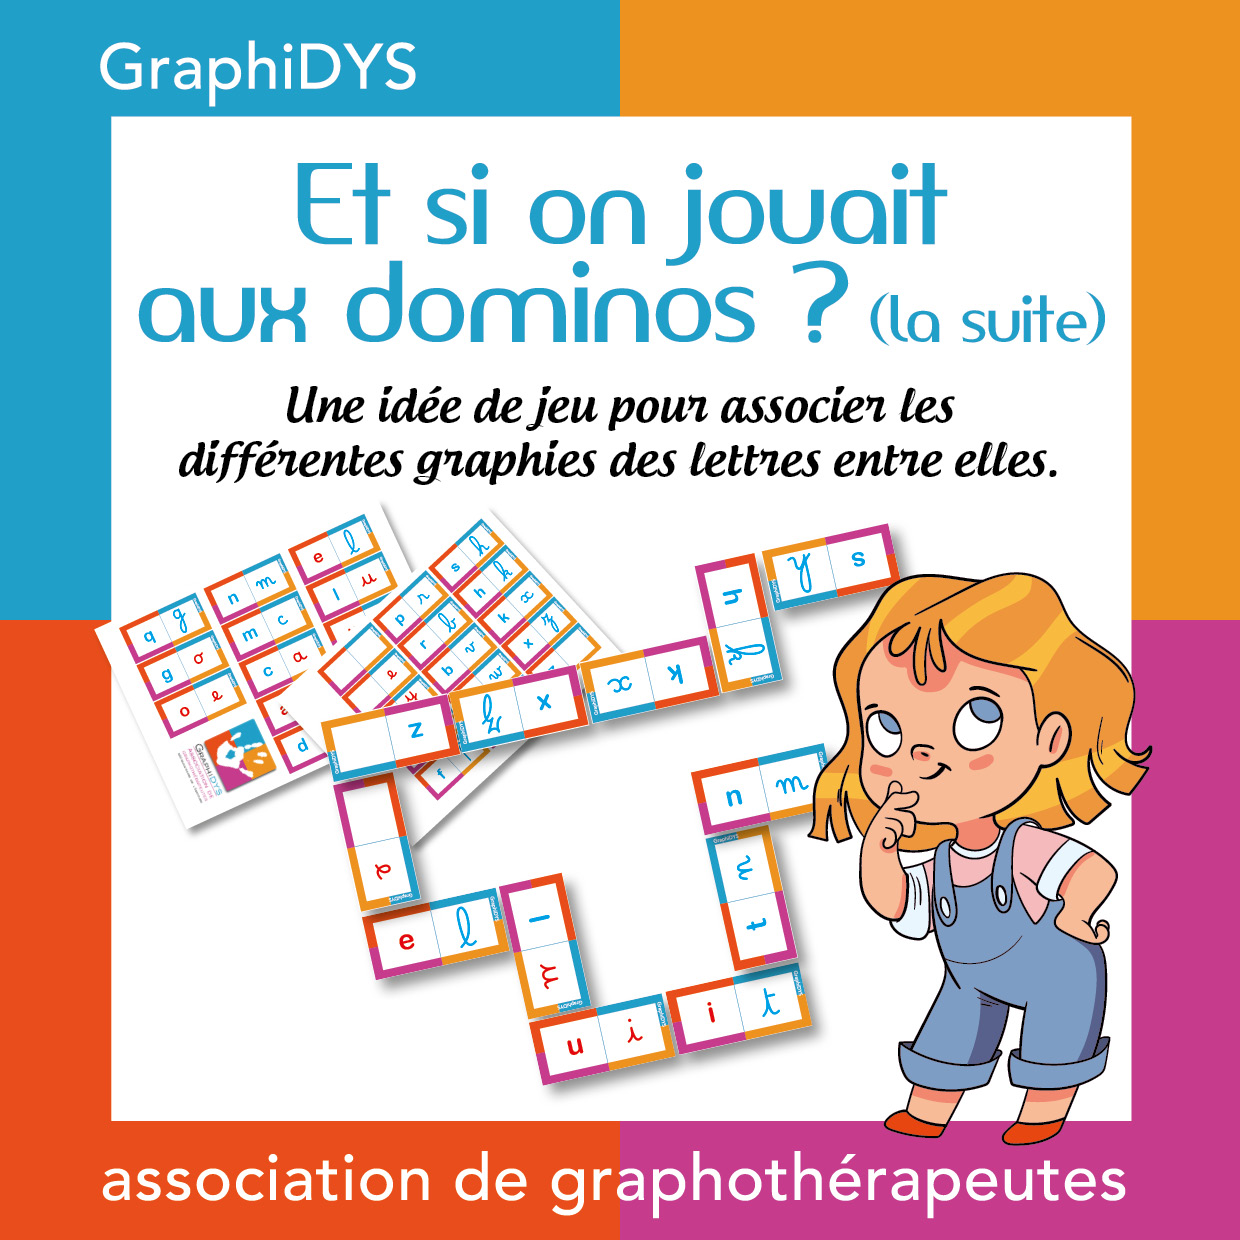 Image Carousel Graphidys Outil - Dominos Jeu complet 